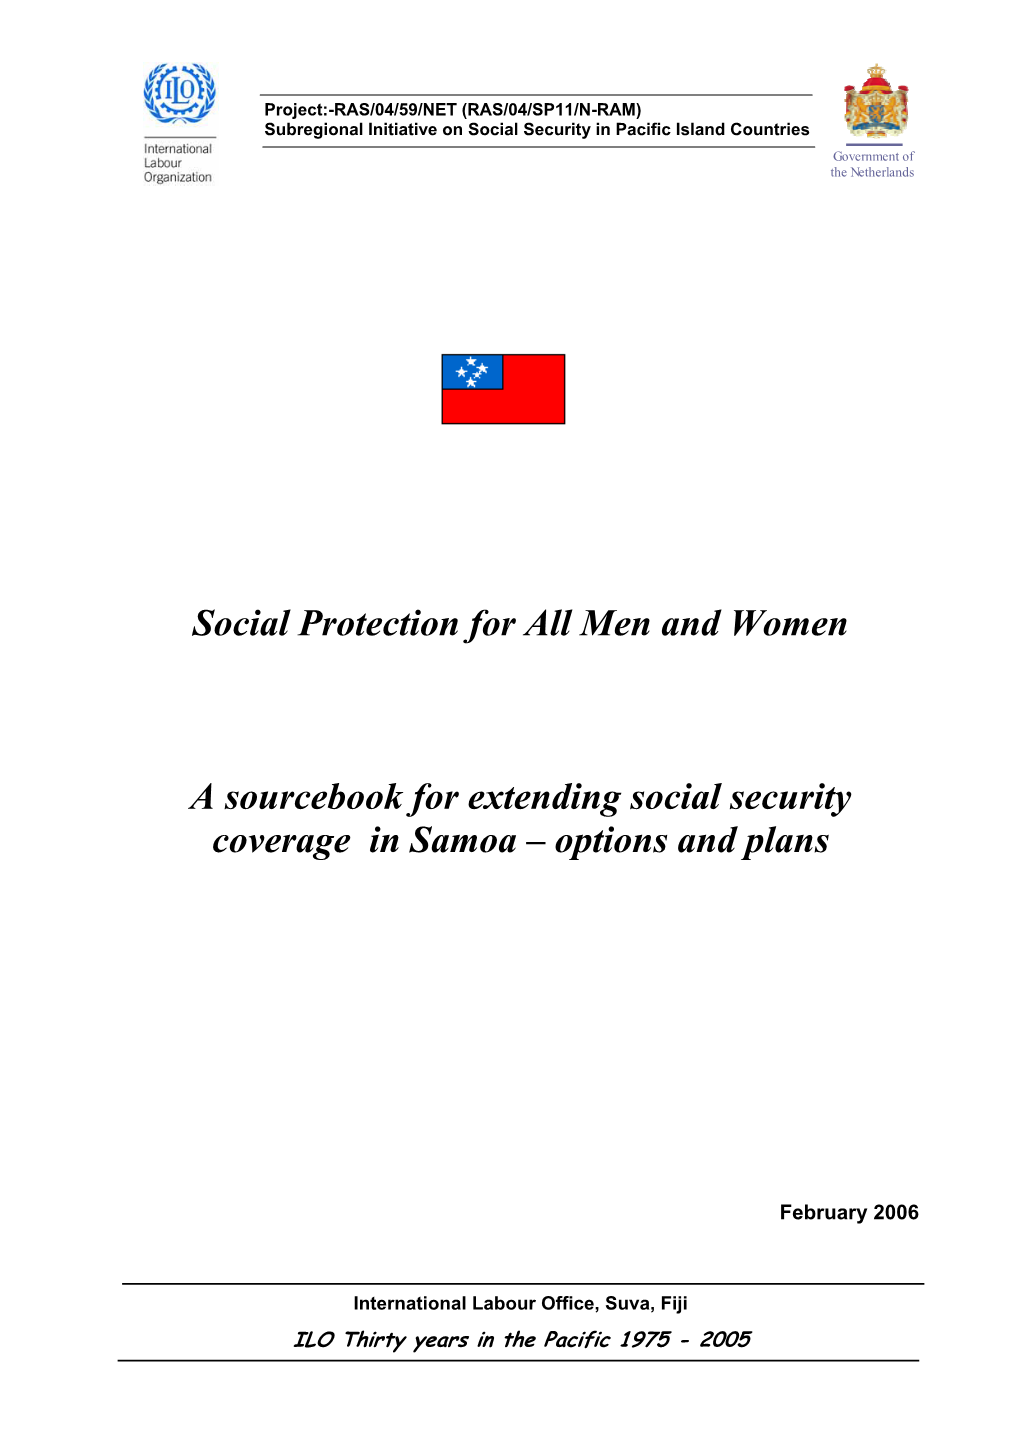 Social Protection for All Men and Women a Sourcebook For